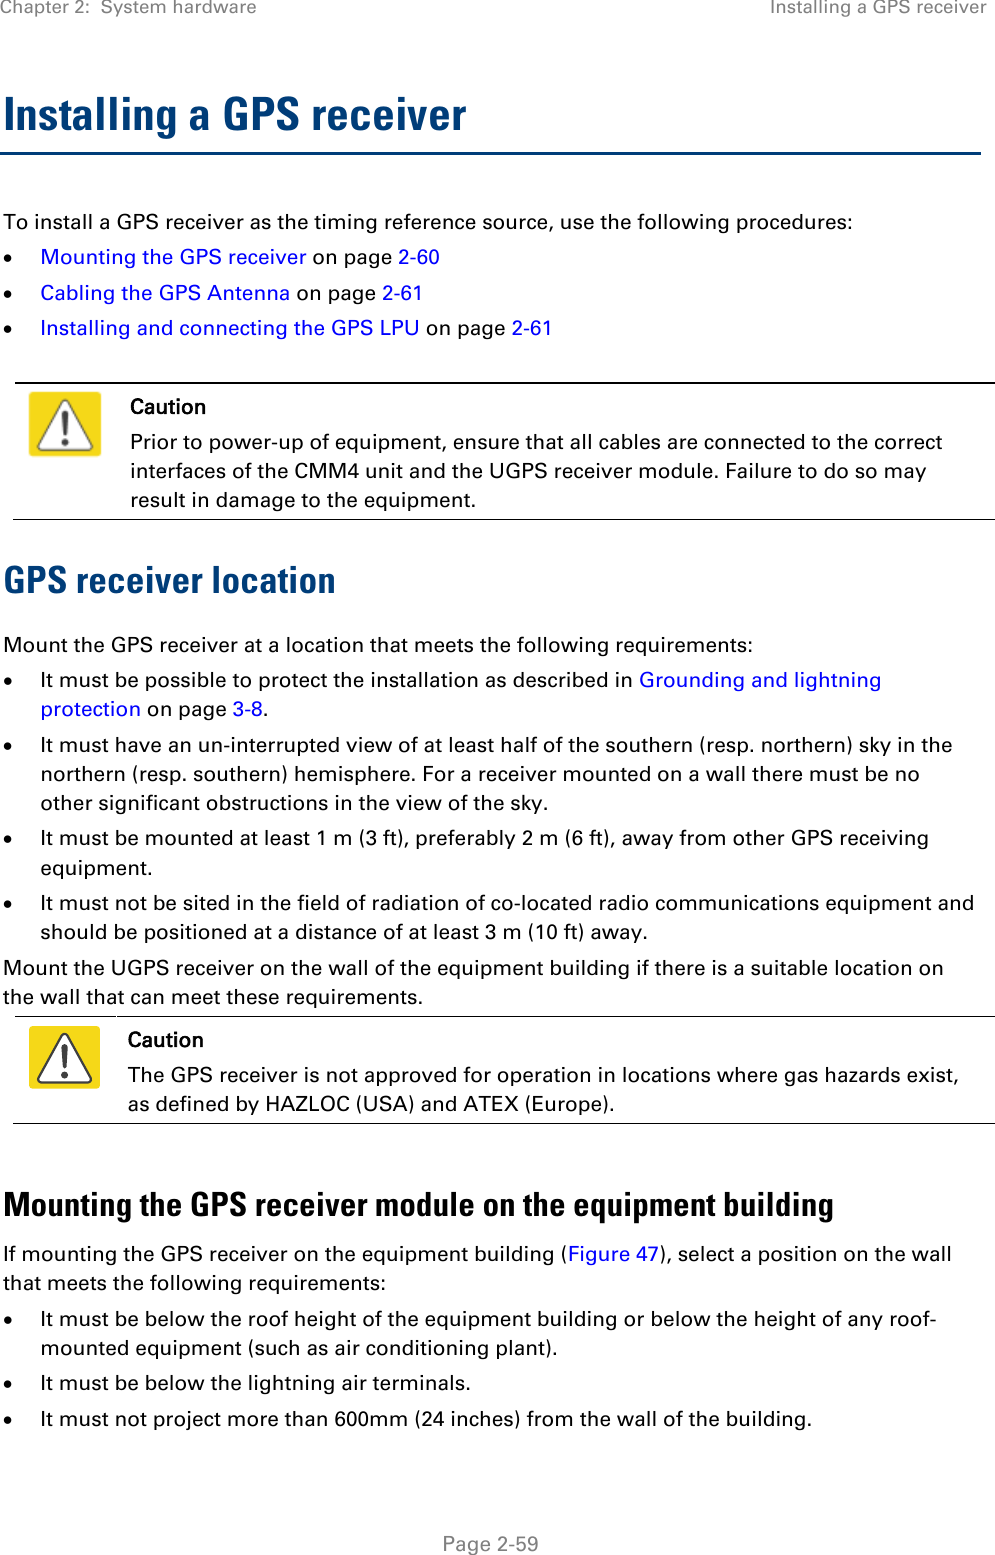 Chapter 2:  System hardware Installing a GPS receiver   Page 2-59 Installing a GPS receiver  To install a GPS receiver as the timing reference source, use the following procedures: • Mounting the GPS receiver on page 2-60 • Cabling the GPS Antenna on page 2-61 • Installing and connecting the GPS LPU on page 2-61   Caution Prior to power-up of equipment, ensure that all cables are connected to the correct interfaces of the CMM4 unit and the UGPS receiver module. Failure to do so may result in damage to the equipment. GPS receiver location Mount the GPS receiver at a location that meets the following requirements: • It must be possible to protect the installation as described in Grounding and lightning protection on page 3-8. • It must have an un-interrupted view of at least half of the southern (resp. northern) sky in the northern (resp. southern) hemisphere. For a receiver mounted on a wall there must be no other significant obstructions in the view of the sky. • It must be mounted at least 1 m (3 ft), preferably 2 m (6 ft), away from other GPS receiving equipment. • It must not be sited in the field of radiation of co-located radio communications equipment and should be positioned at a distance of at least 3 m (10 ft) away. Mount the UGPS receiver on the wall of the equipment building if there is a suitable location on the wall that can meet these requirements.   Caution The GPS receiver is not approved for operation in locations where gas hazards exist, as defined by HAZLOC (USA) and ATEX (Europe).  Mounting the GPS receiver module on the equipment building If mounting the GPS receiver on the equipment building (Figure 47), select a position on the wall that meets the following requirements: • It must be below the roof height of the equipment building or below the height of any roof-mounted equipment (such as air conditioning plant). • It must be below the lightning air terminals. • It must not project more than 600mm (24 inches) from the wall of the building. 